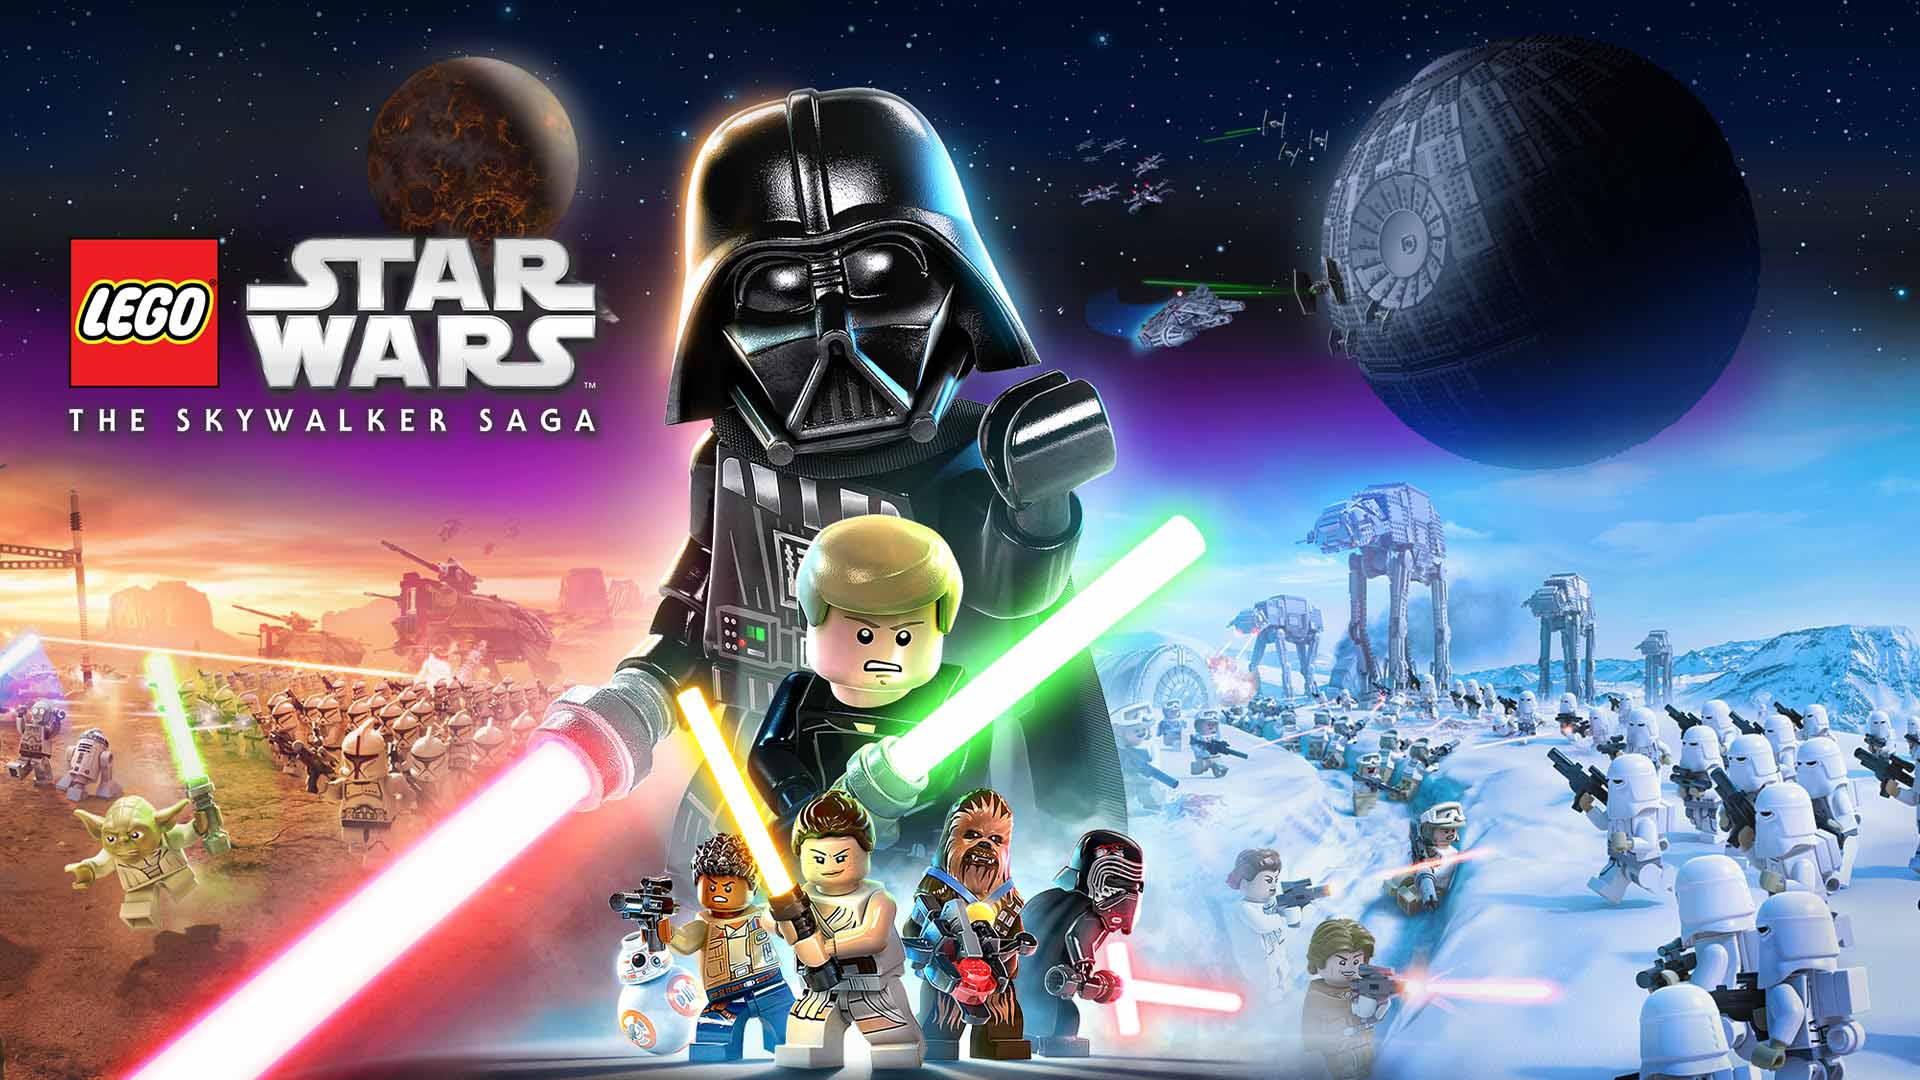 Fix: Lego Star Wars The Skywalker Saga Crashing or Not Loading on PS4 and PS5